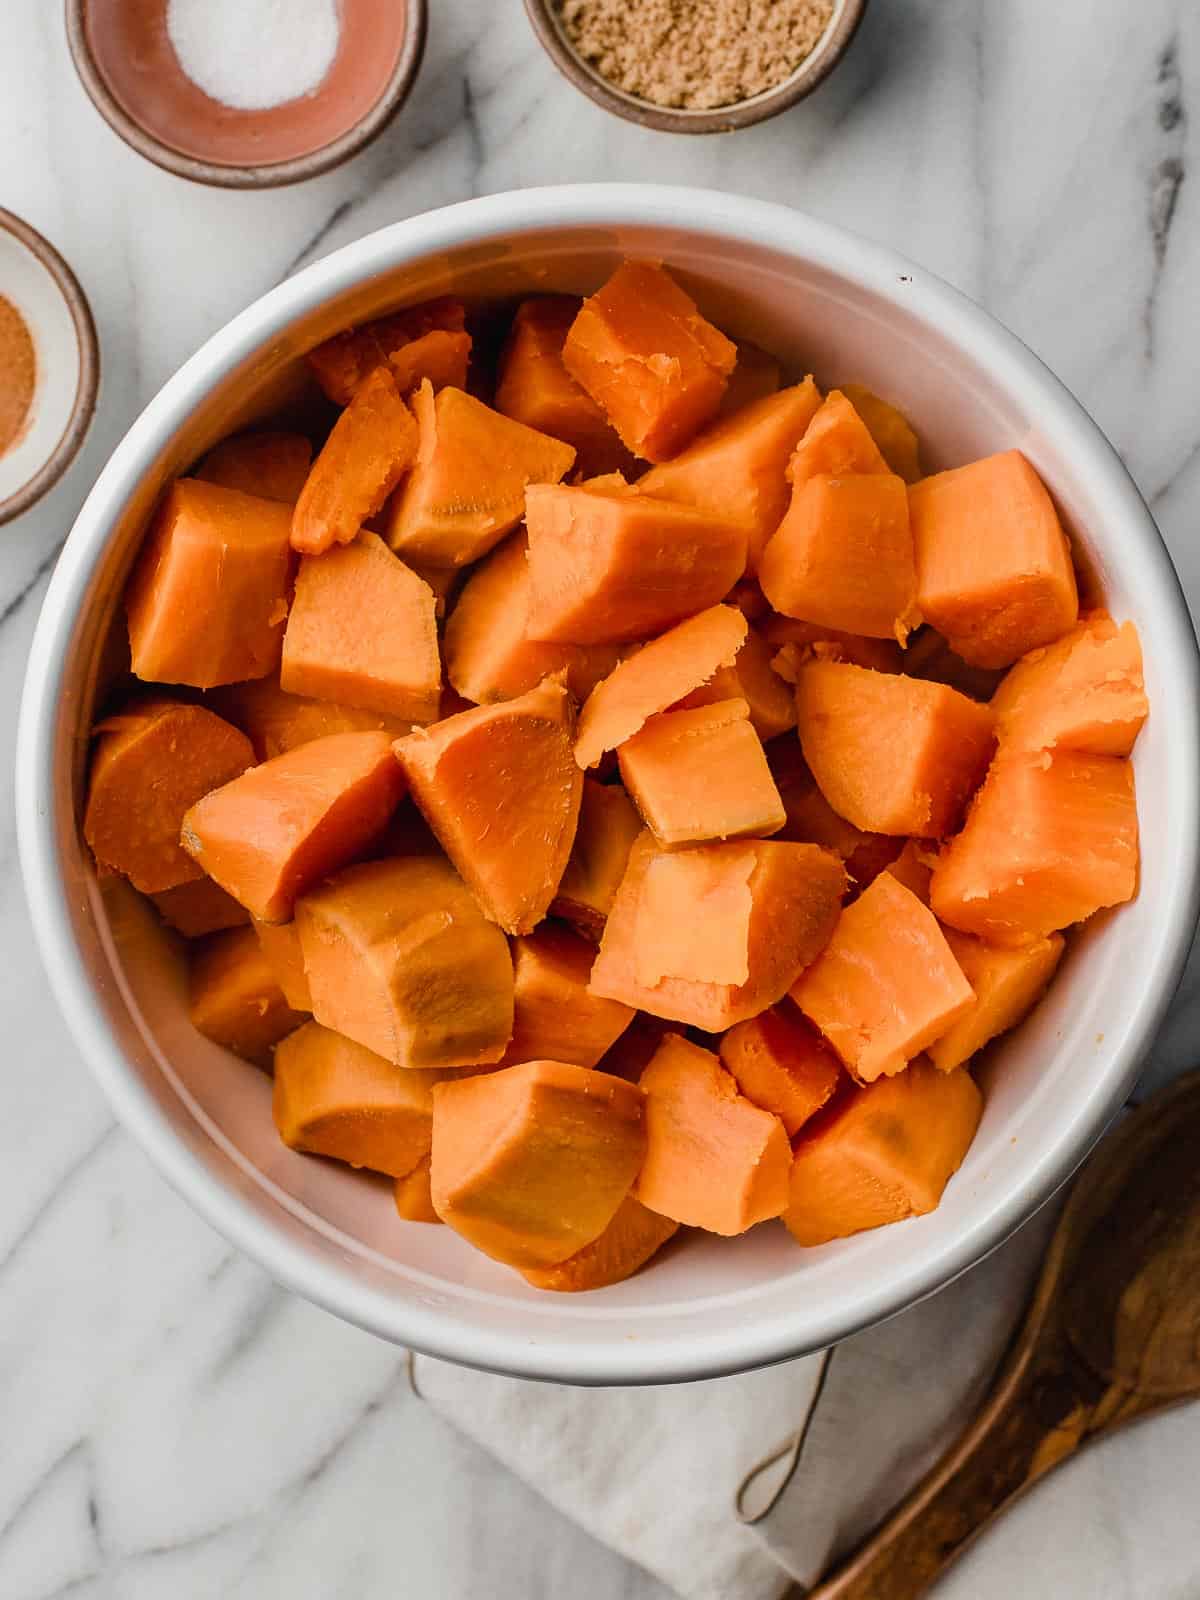 Sweet potatoes drained in a bowl.